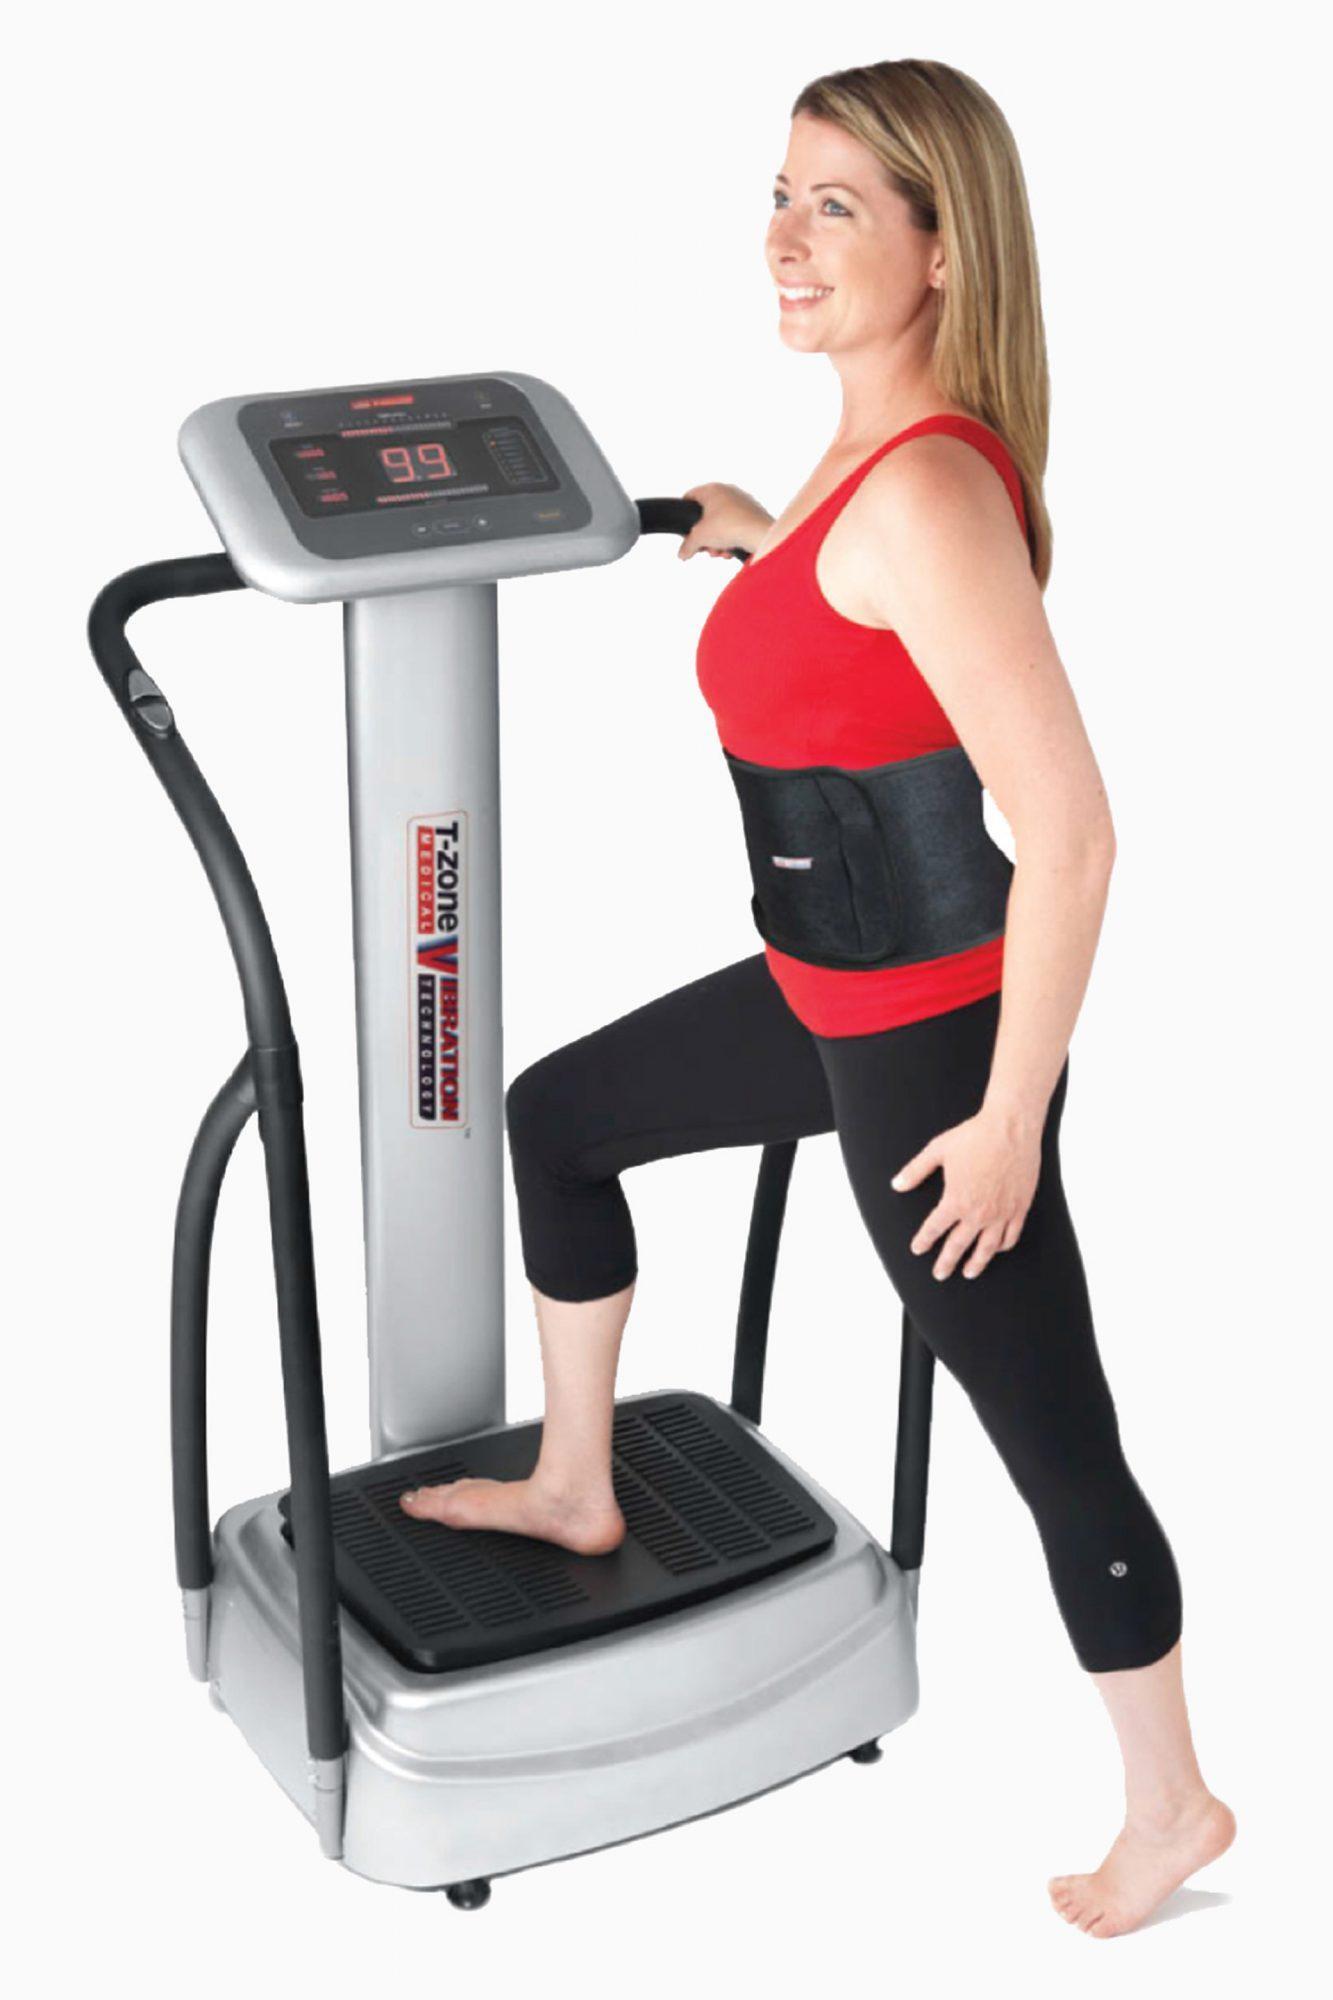 T-Zone Vibration Exercise using Whole Body Vibration to Lose Weight